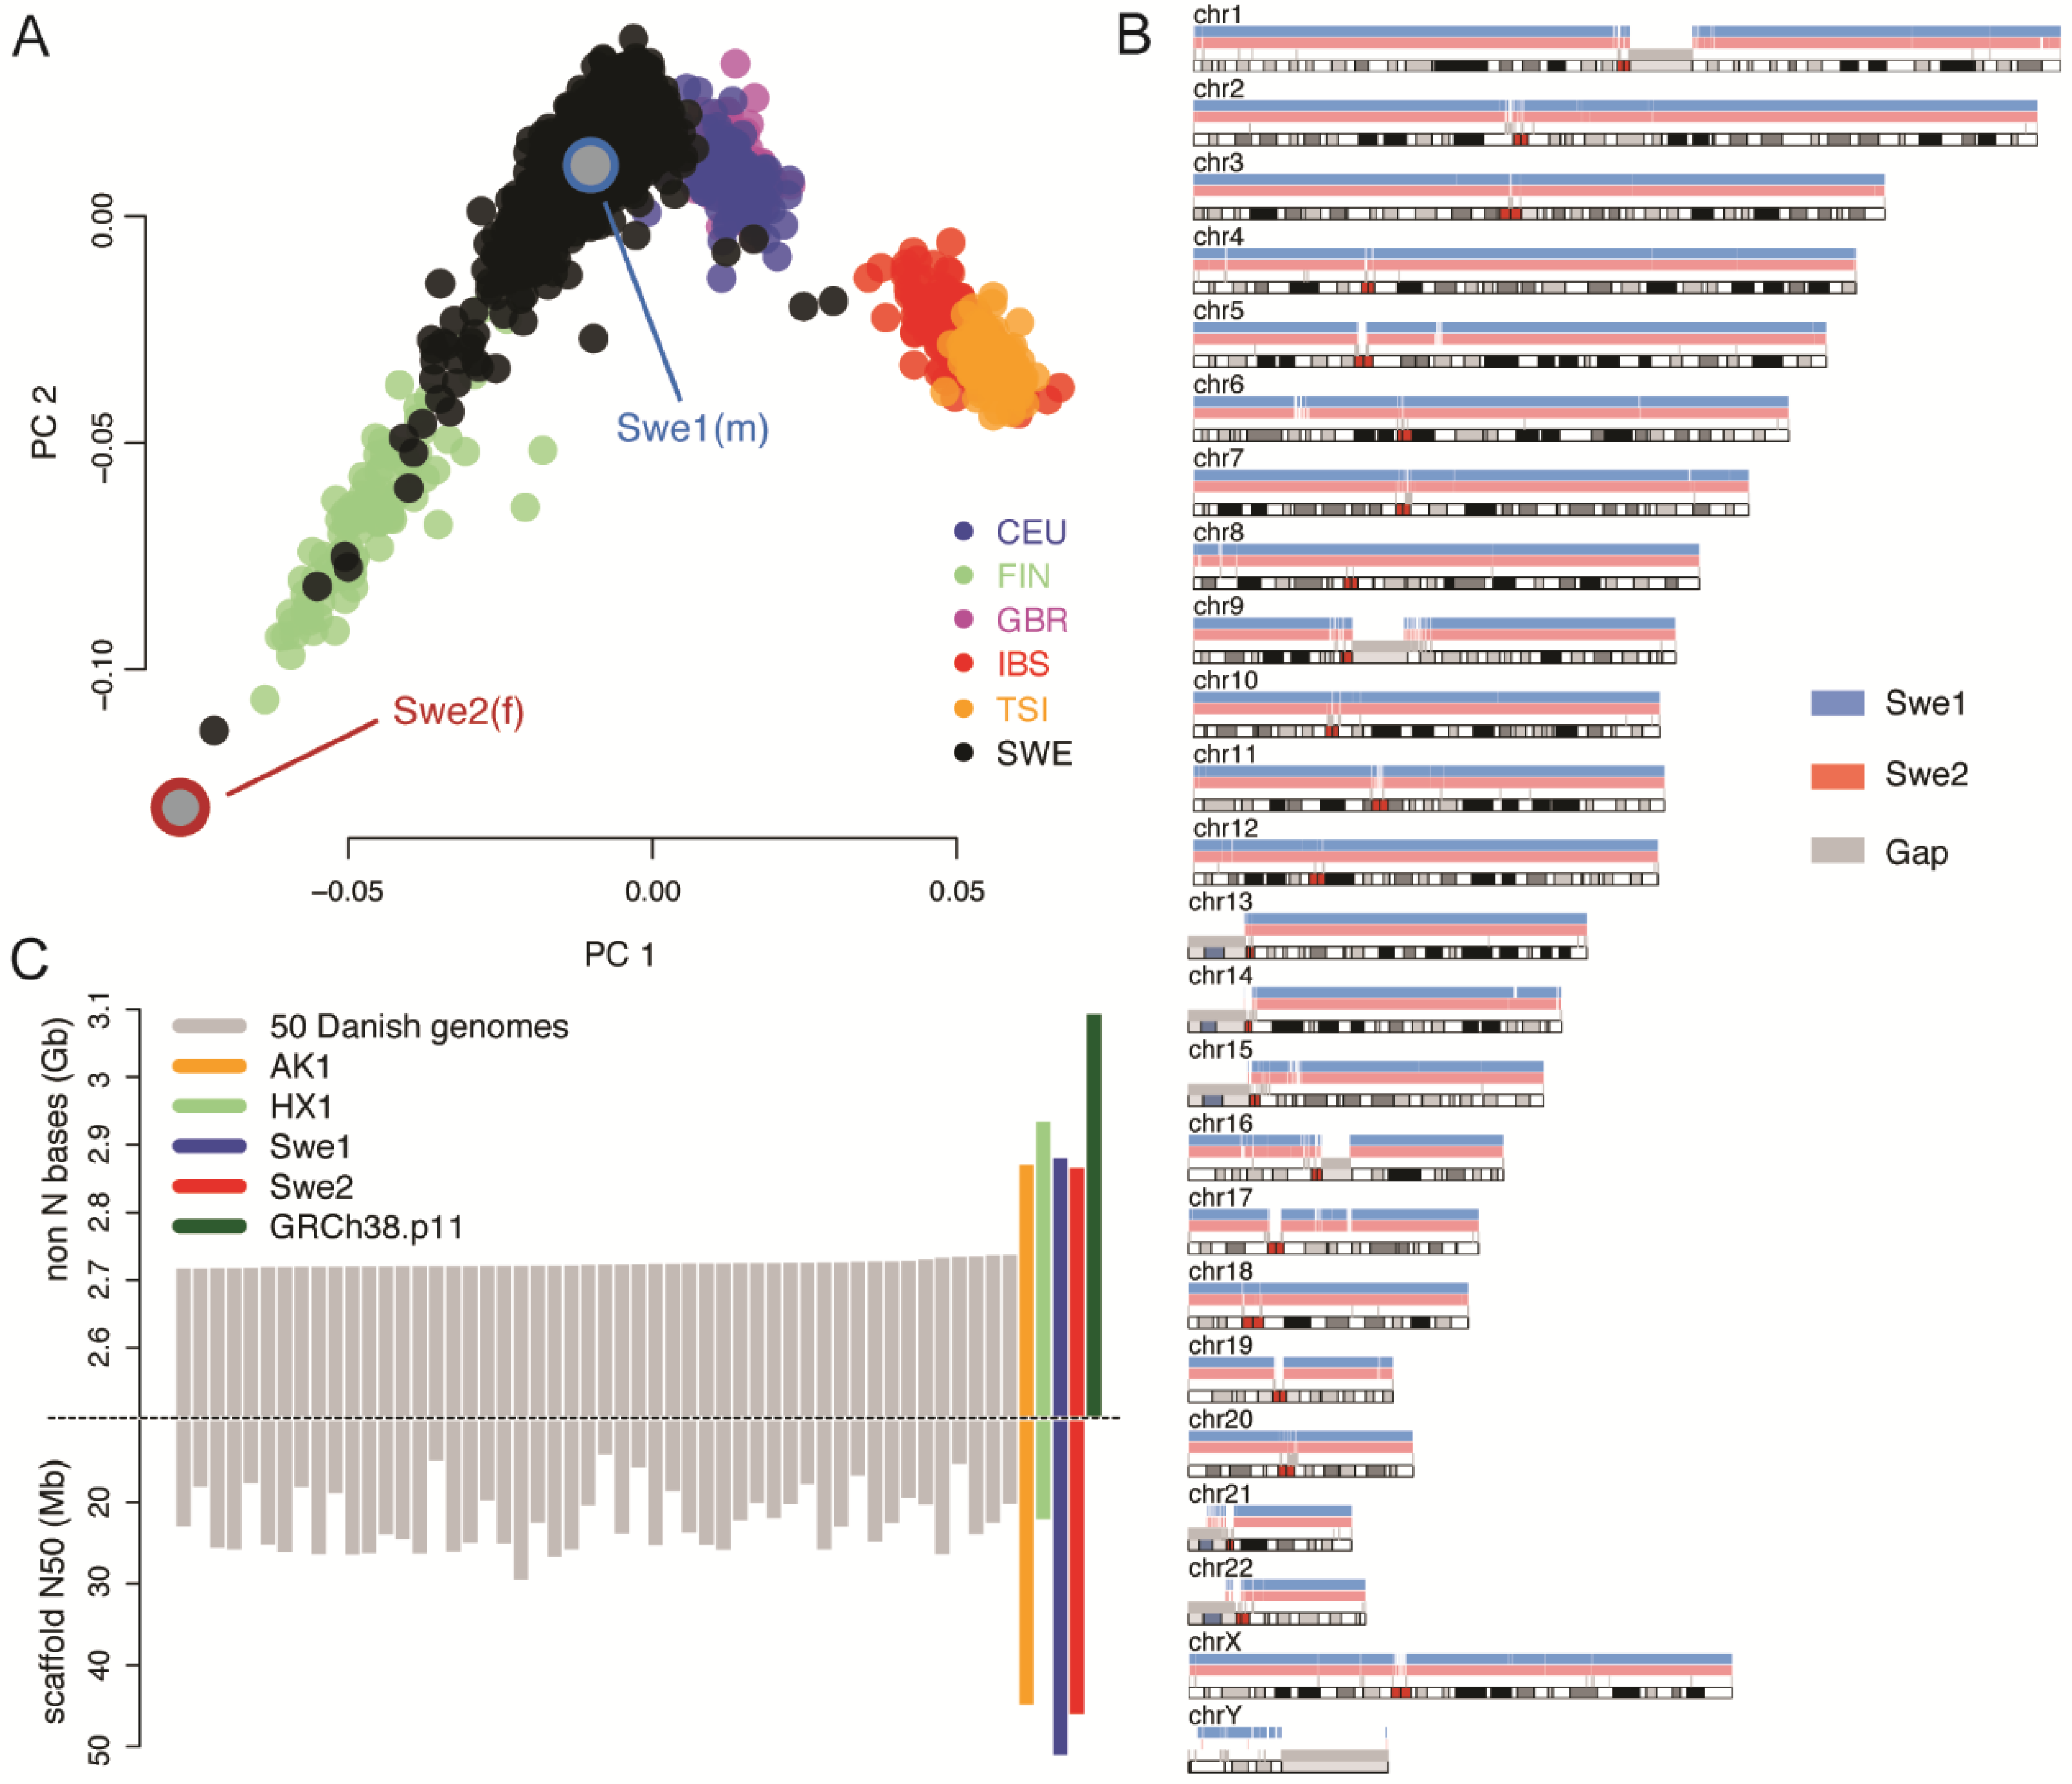 Genes | Free Full-Text | De Novo Assembly of Two Swedish Genomes Reveals  Missing Segments from the Human GRCh38 Reference and Improves Variant  Calling of Population-Scale Sequencing Data | HTML